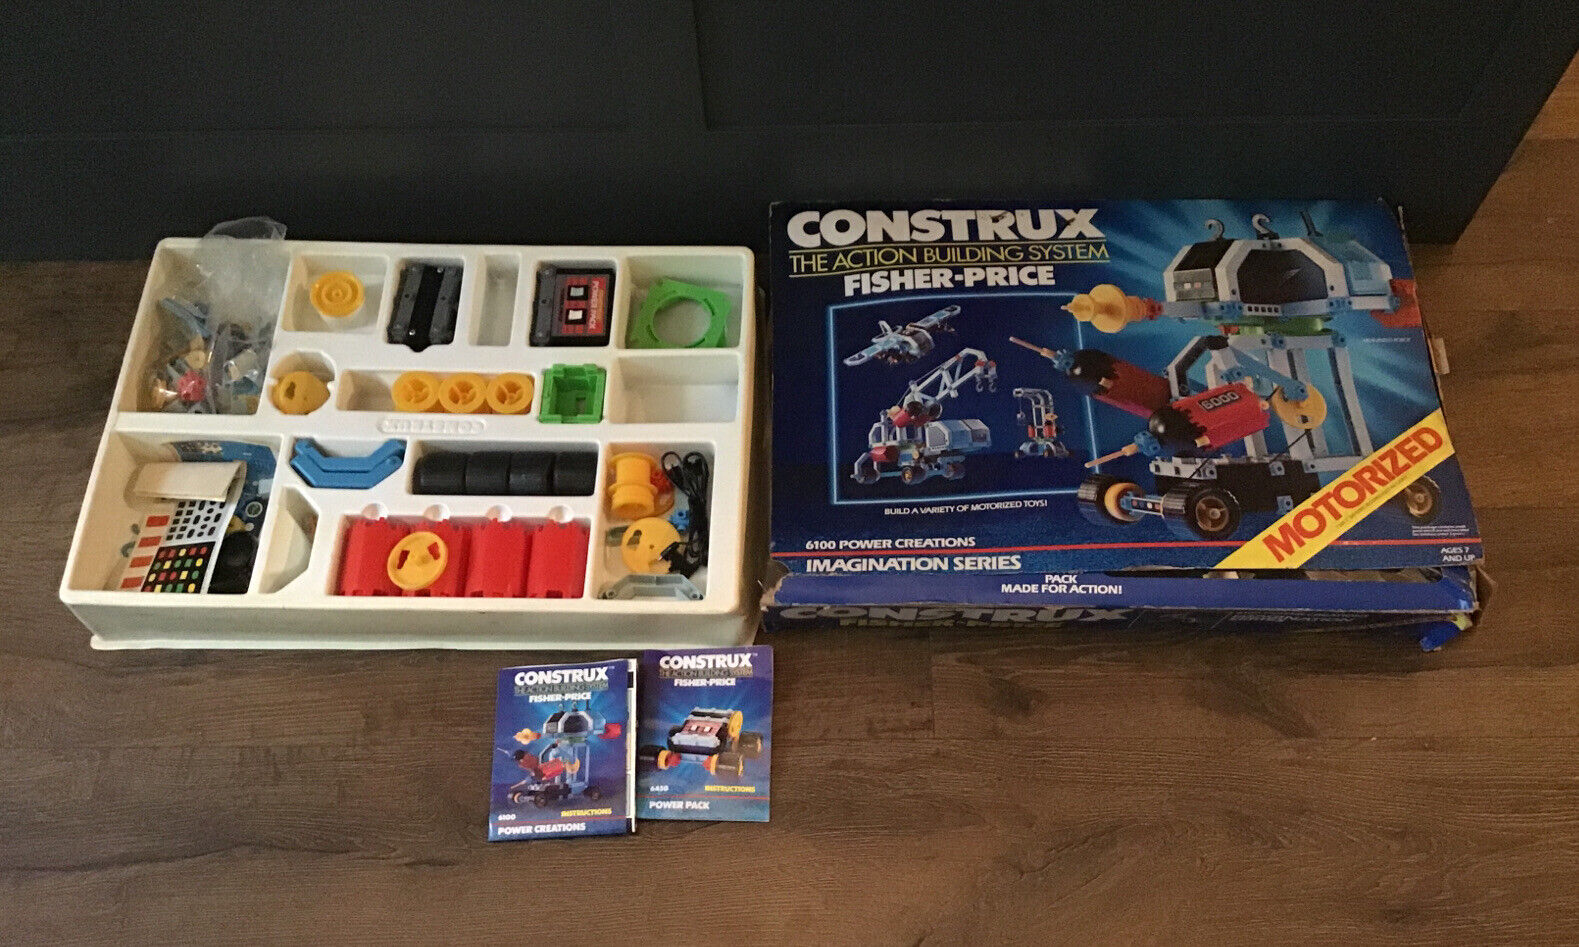 Construx 6100 Power Creations Imagination Series NOT COMPLETE Toy In Box